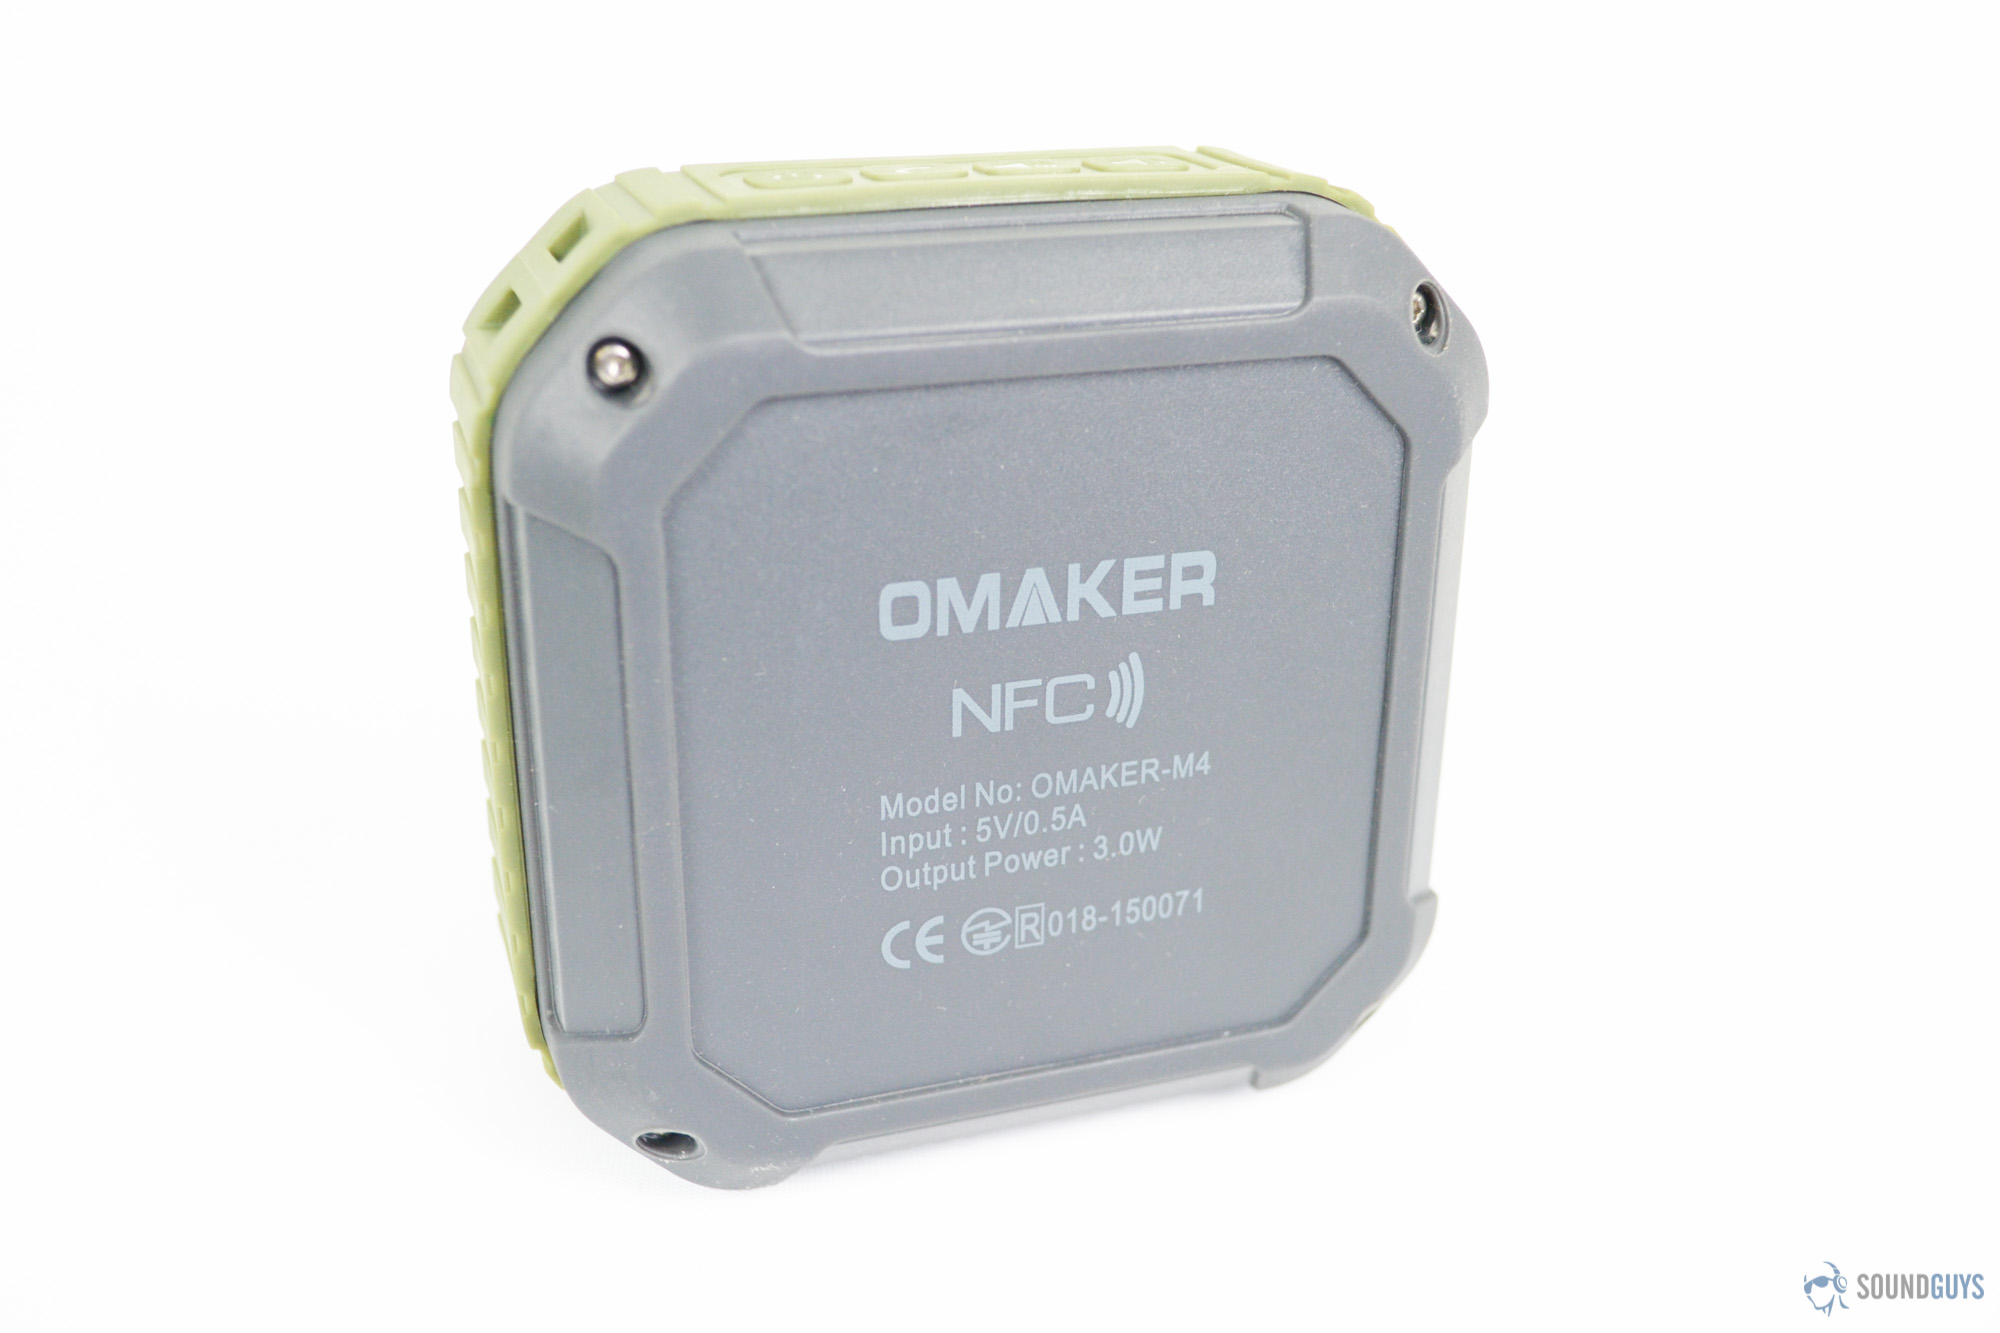 If you have a compatible device, you can quick-pair via NFC. Pictured: The bottom of the Omaker M4 speaker which shows that its NFC-compatible.